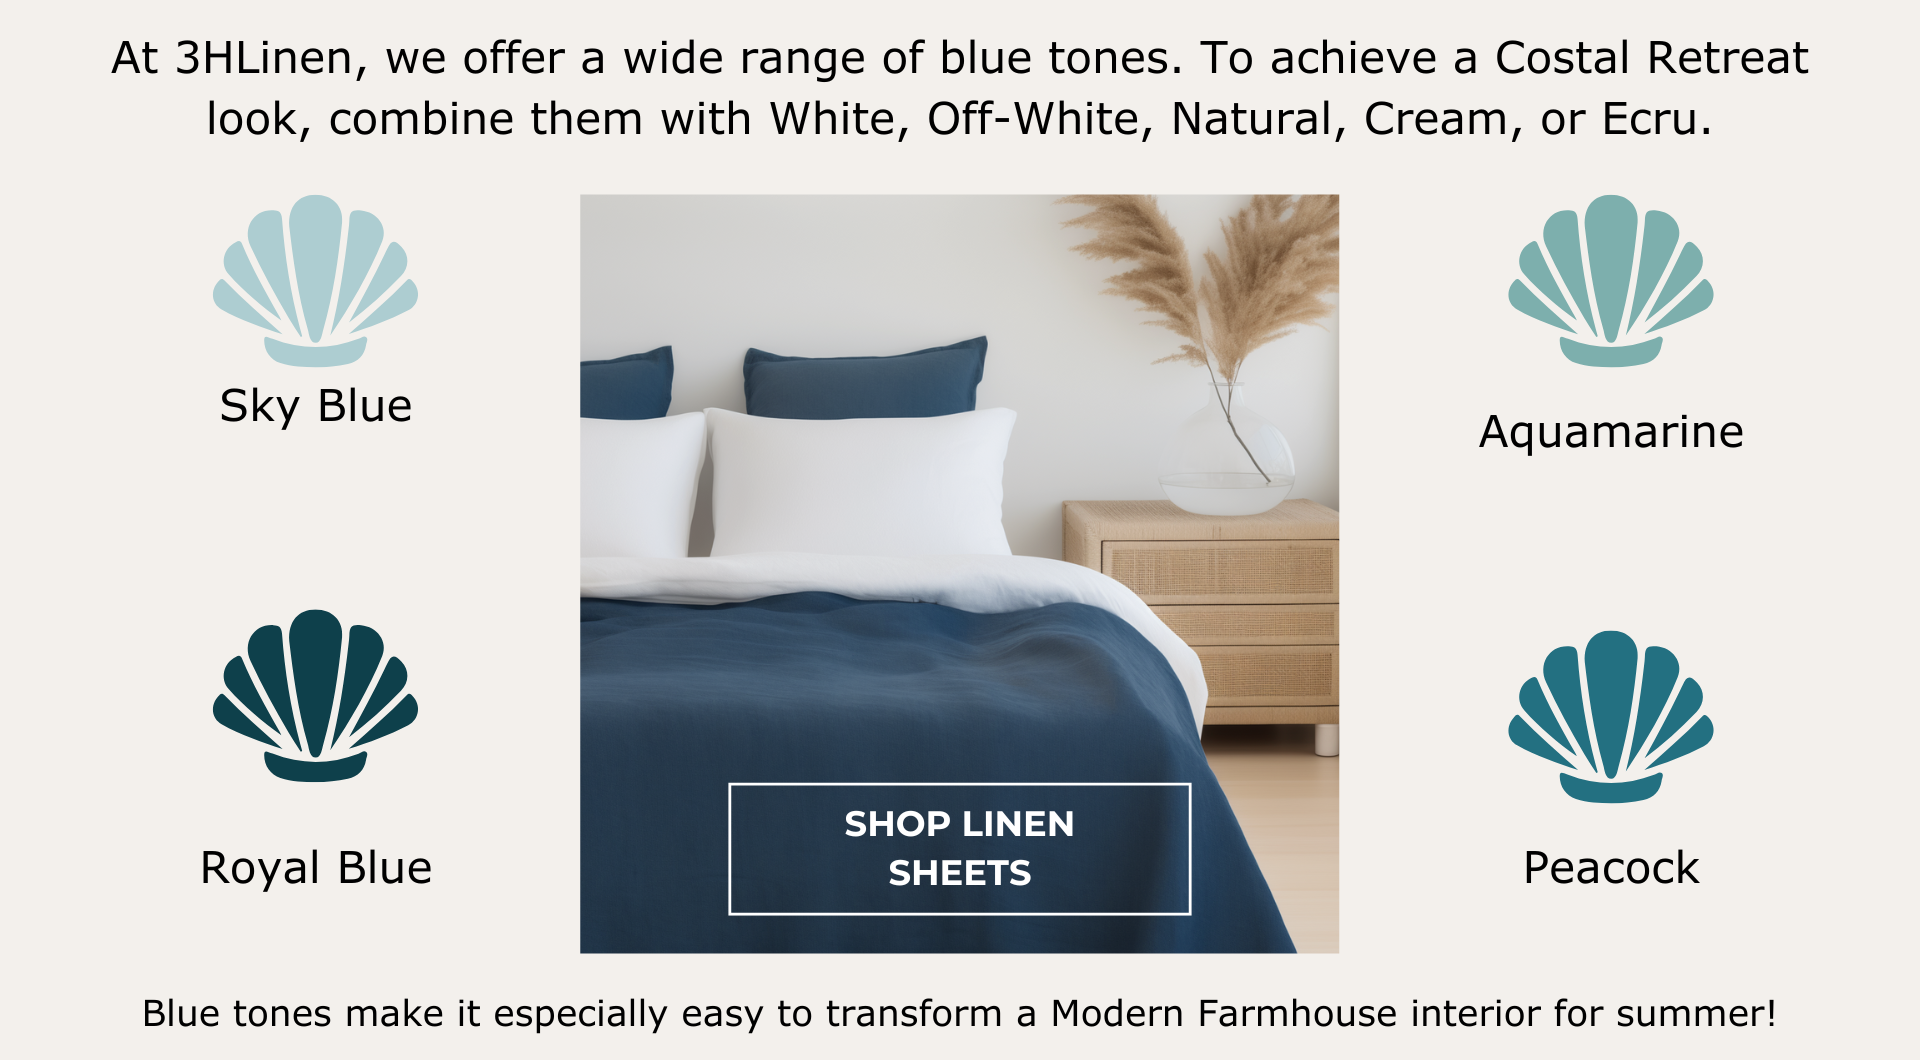 At 3HLinen, we offer a wide range of blue tones: Sky Blue, Royal Blue, Aquamarine, Peacock. To achieve a Costal Retreat look, combine them with White, Off-White, Natural, Cream, or Ecru.